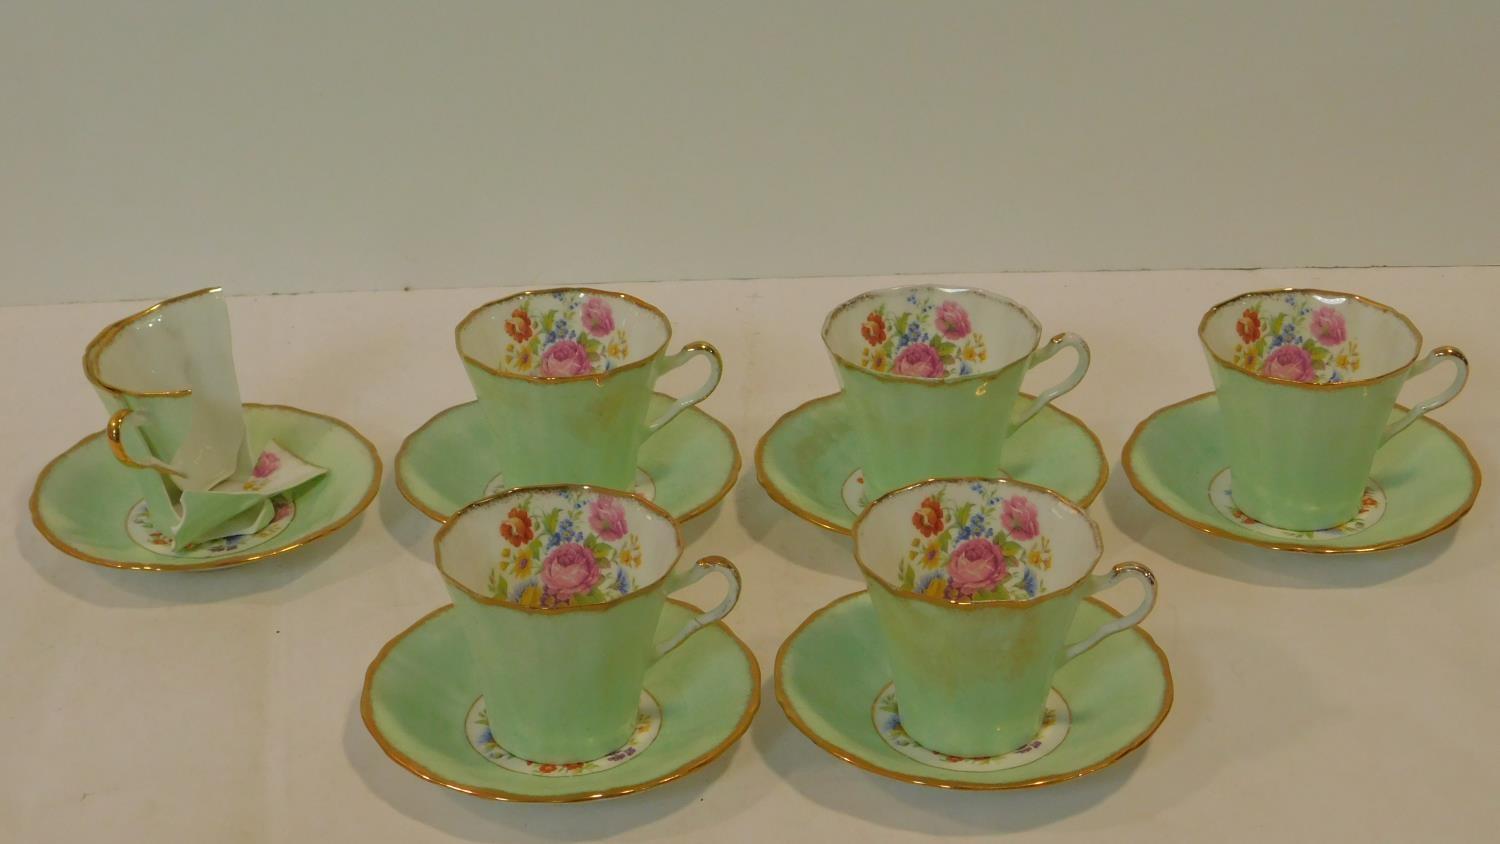 An antique Imperial Bone China five person tea set, gilded with 22kt gold and hand painted with a